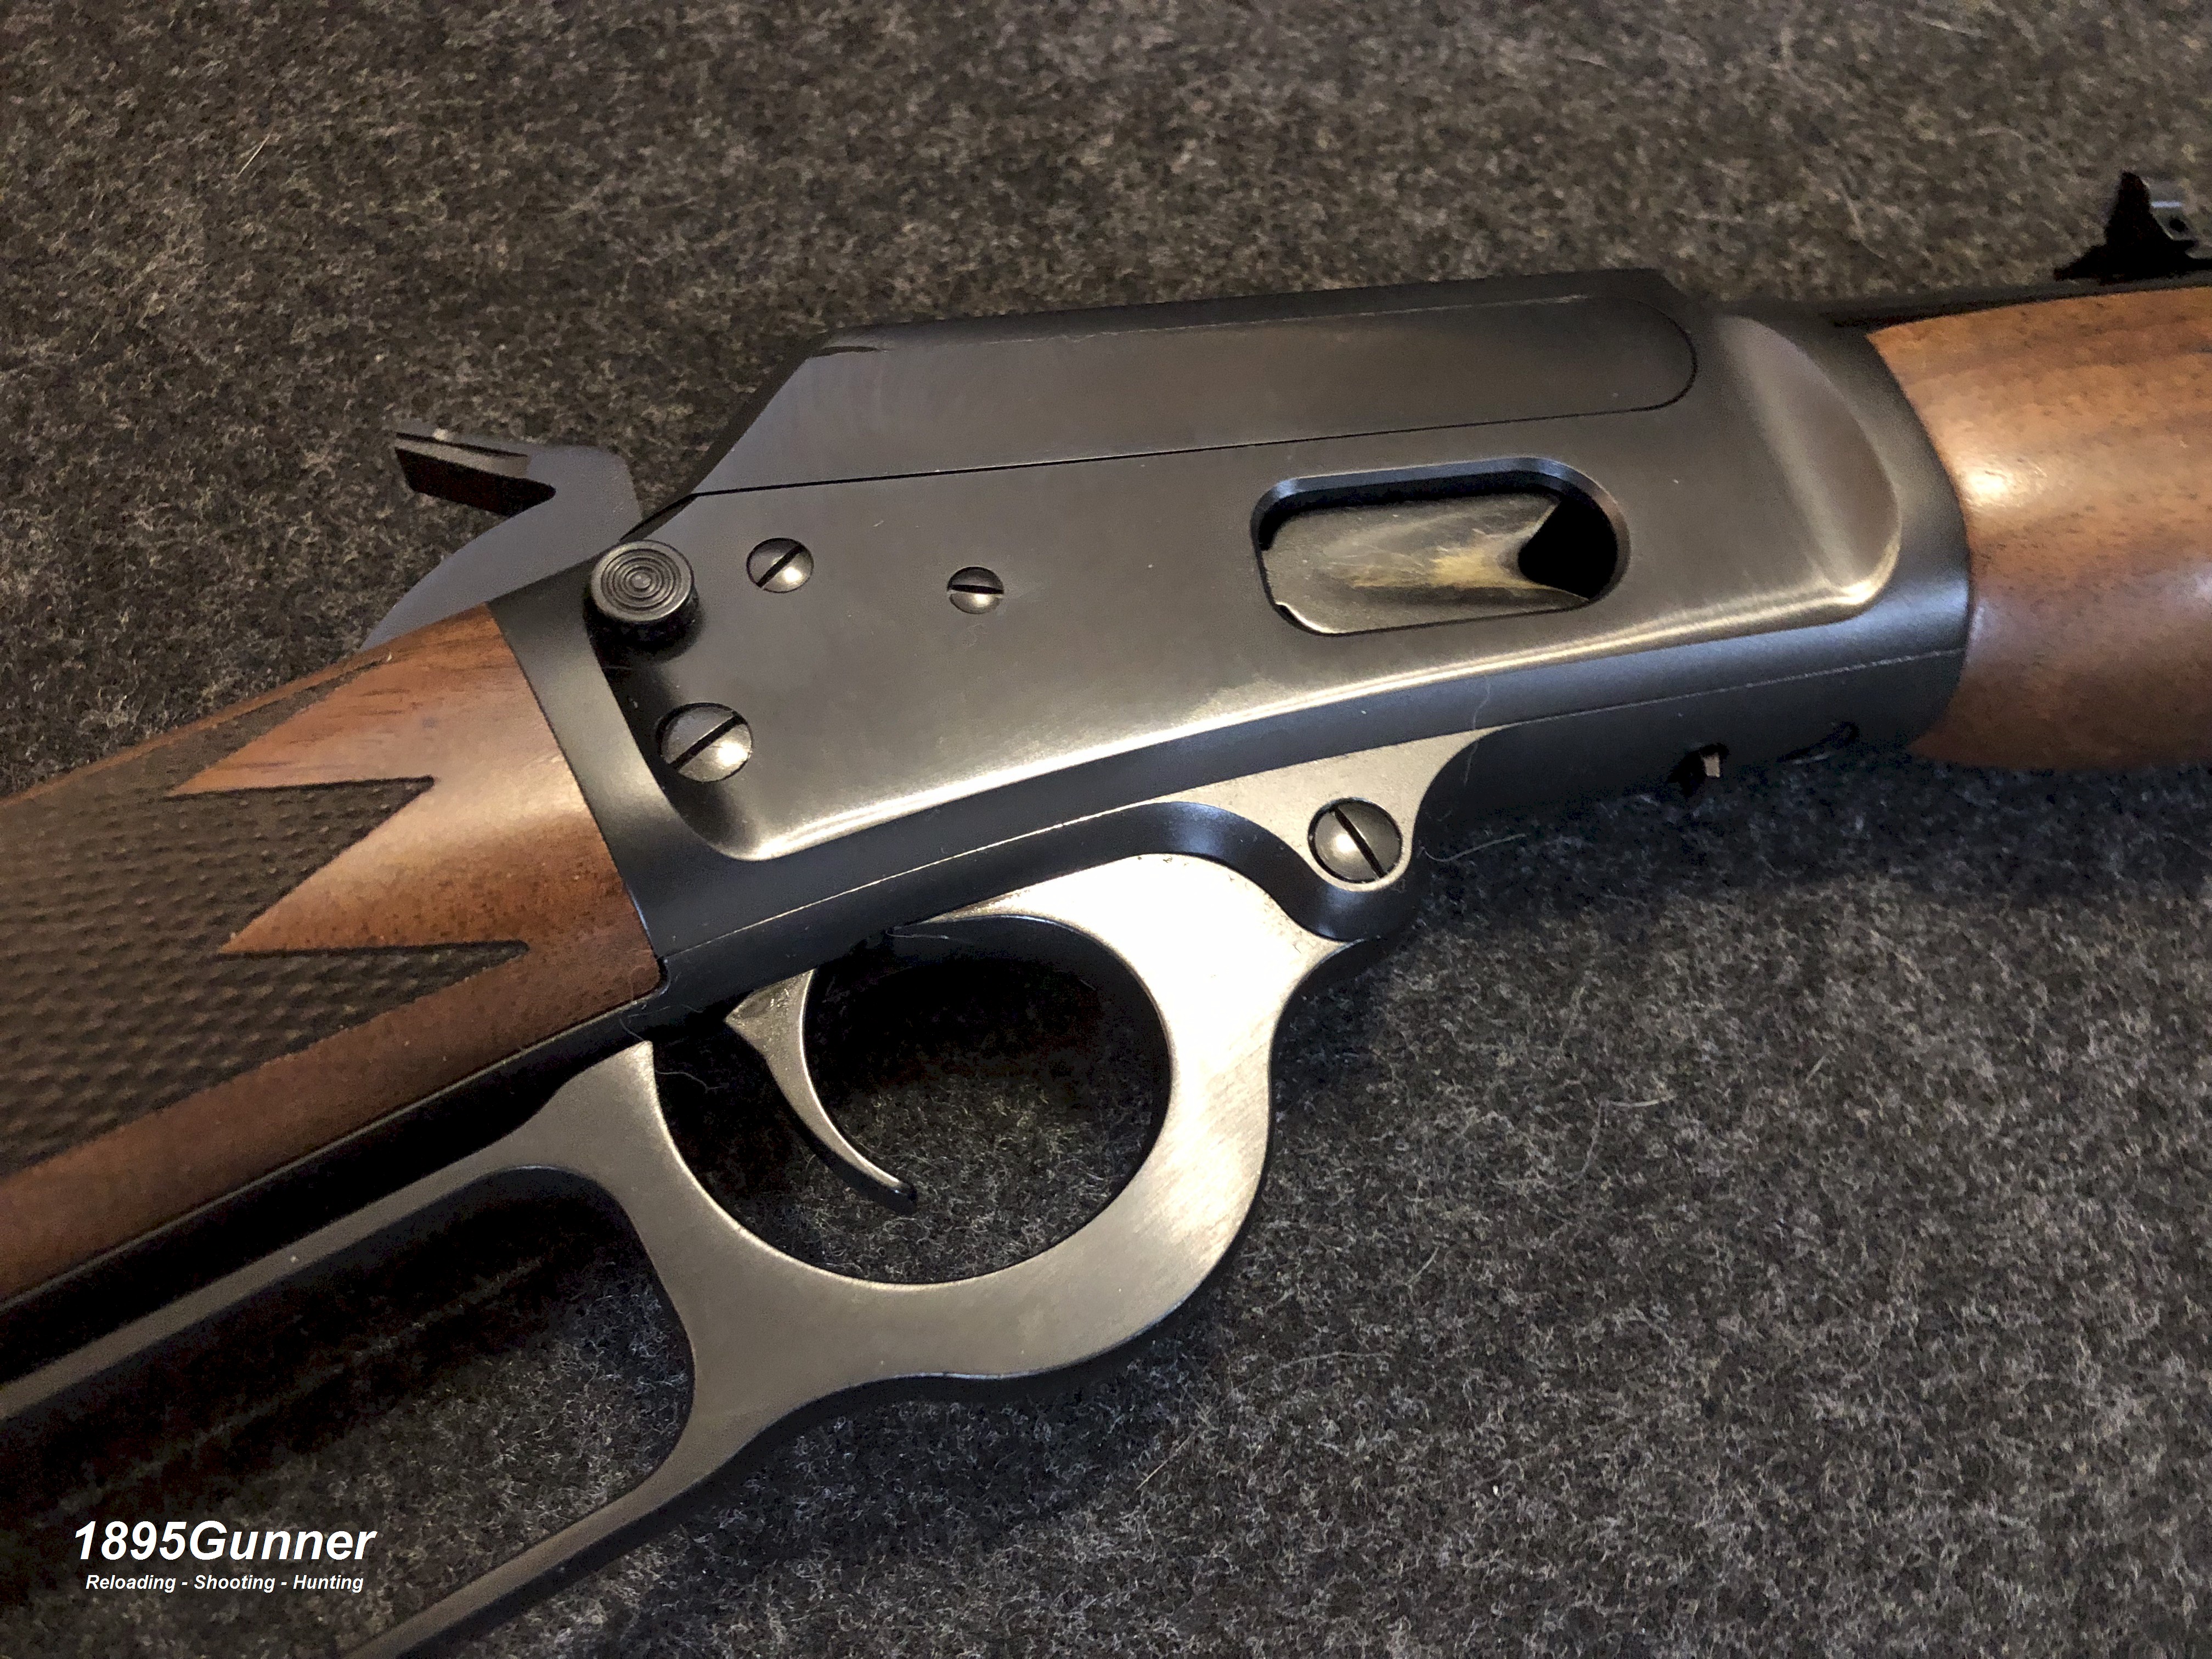 The Ruger Made Marlin 1894 Classic .357 Magnum